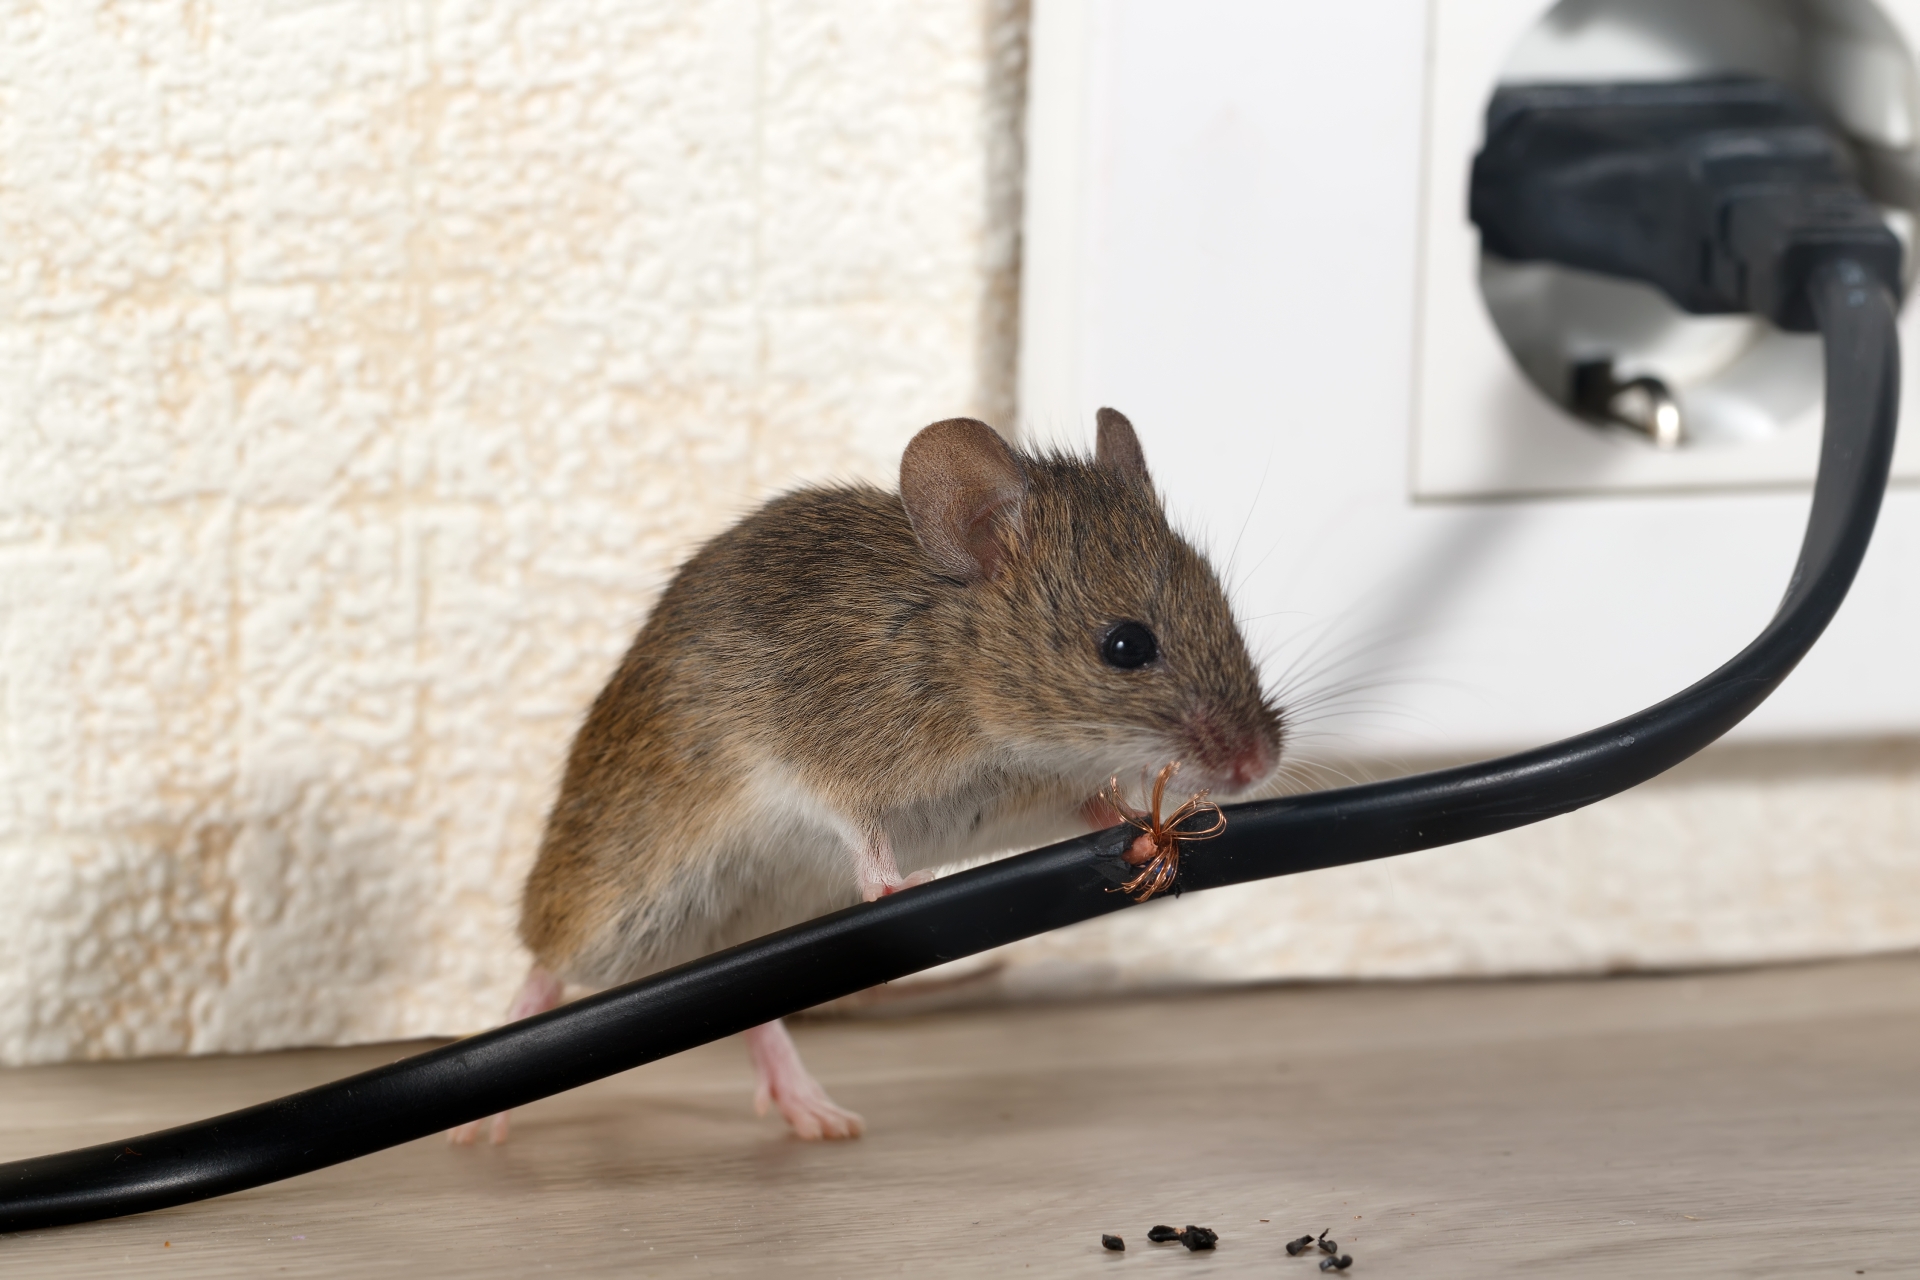 Mice Infestation, Pest Control in Ashford, TW15. Call Now 020 8166 9746